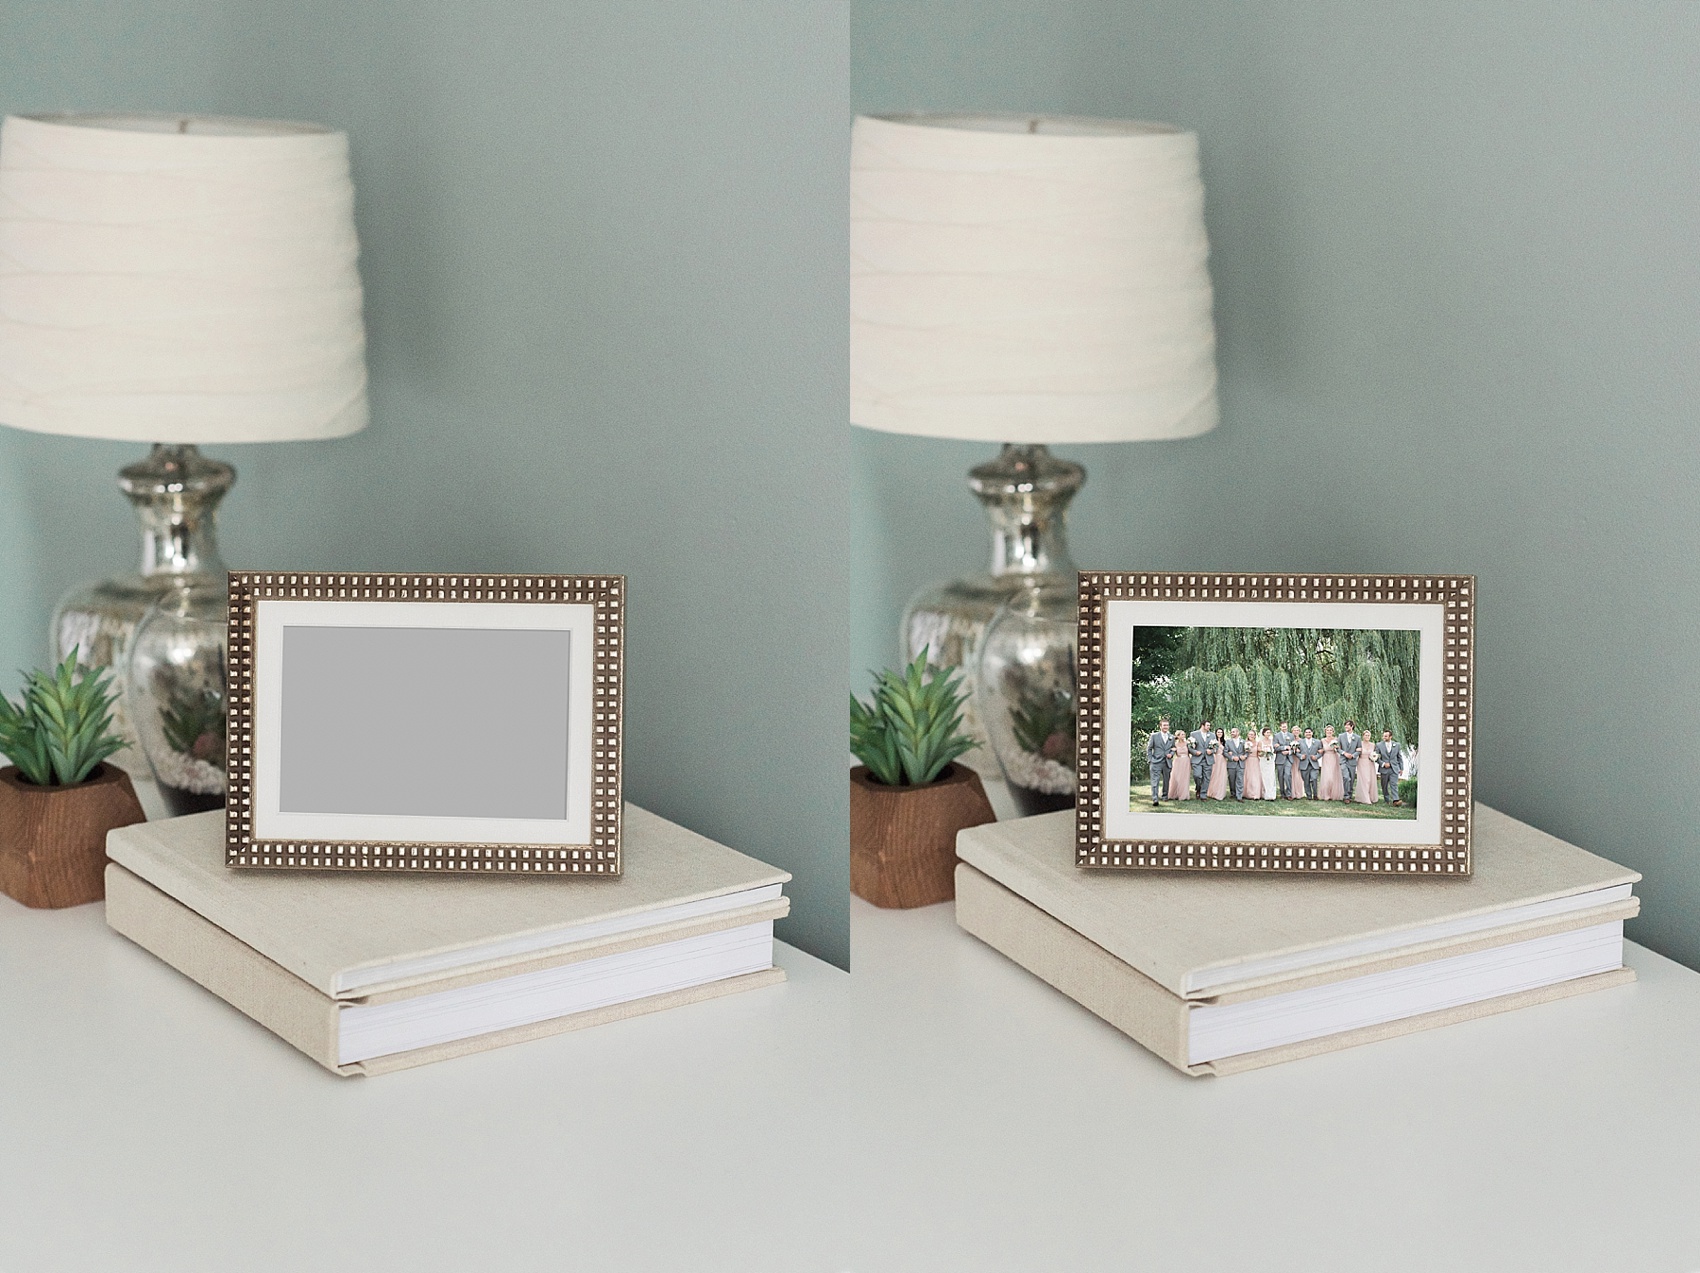 Smart template to add your own image to a frame with an album